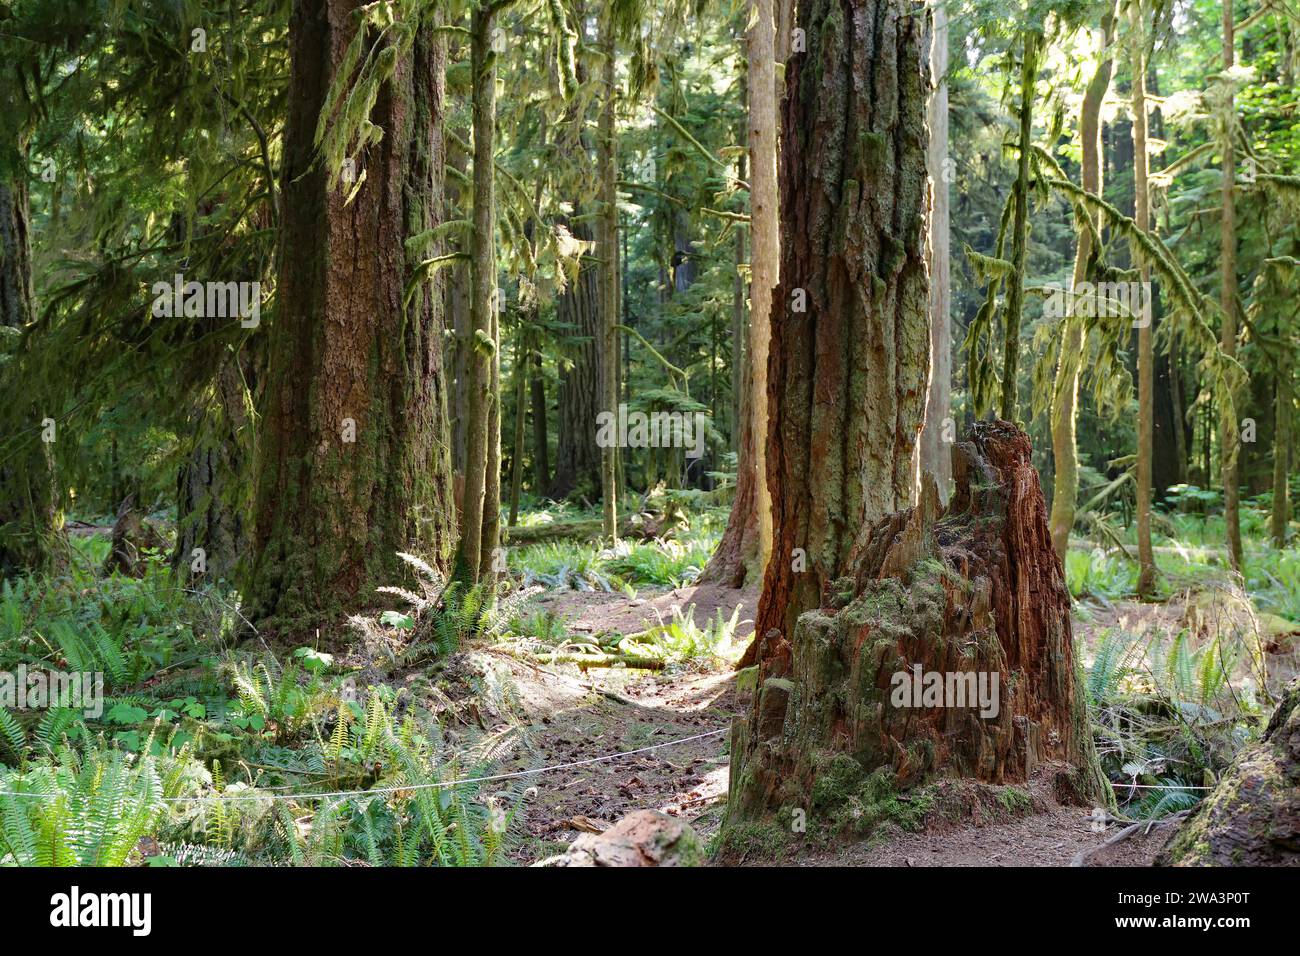 Huge old Douglas firs, overgrown with mosses and lichens, Cathedral Grove, MacMillan Park, Vancouver Island, Canada, North America Stock Photo